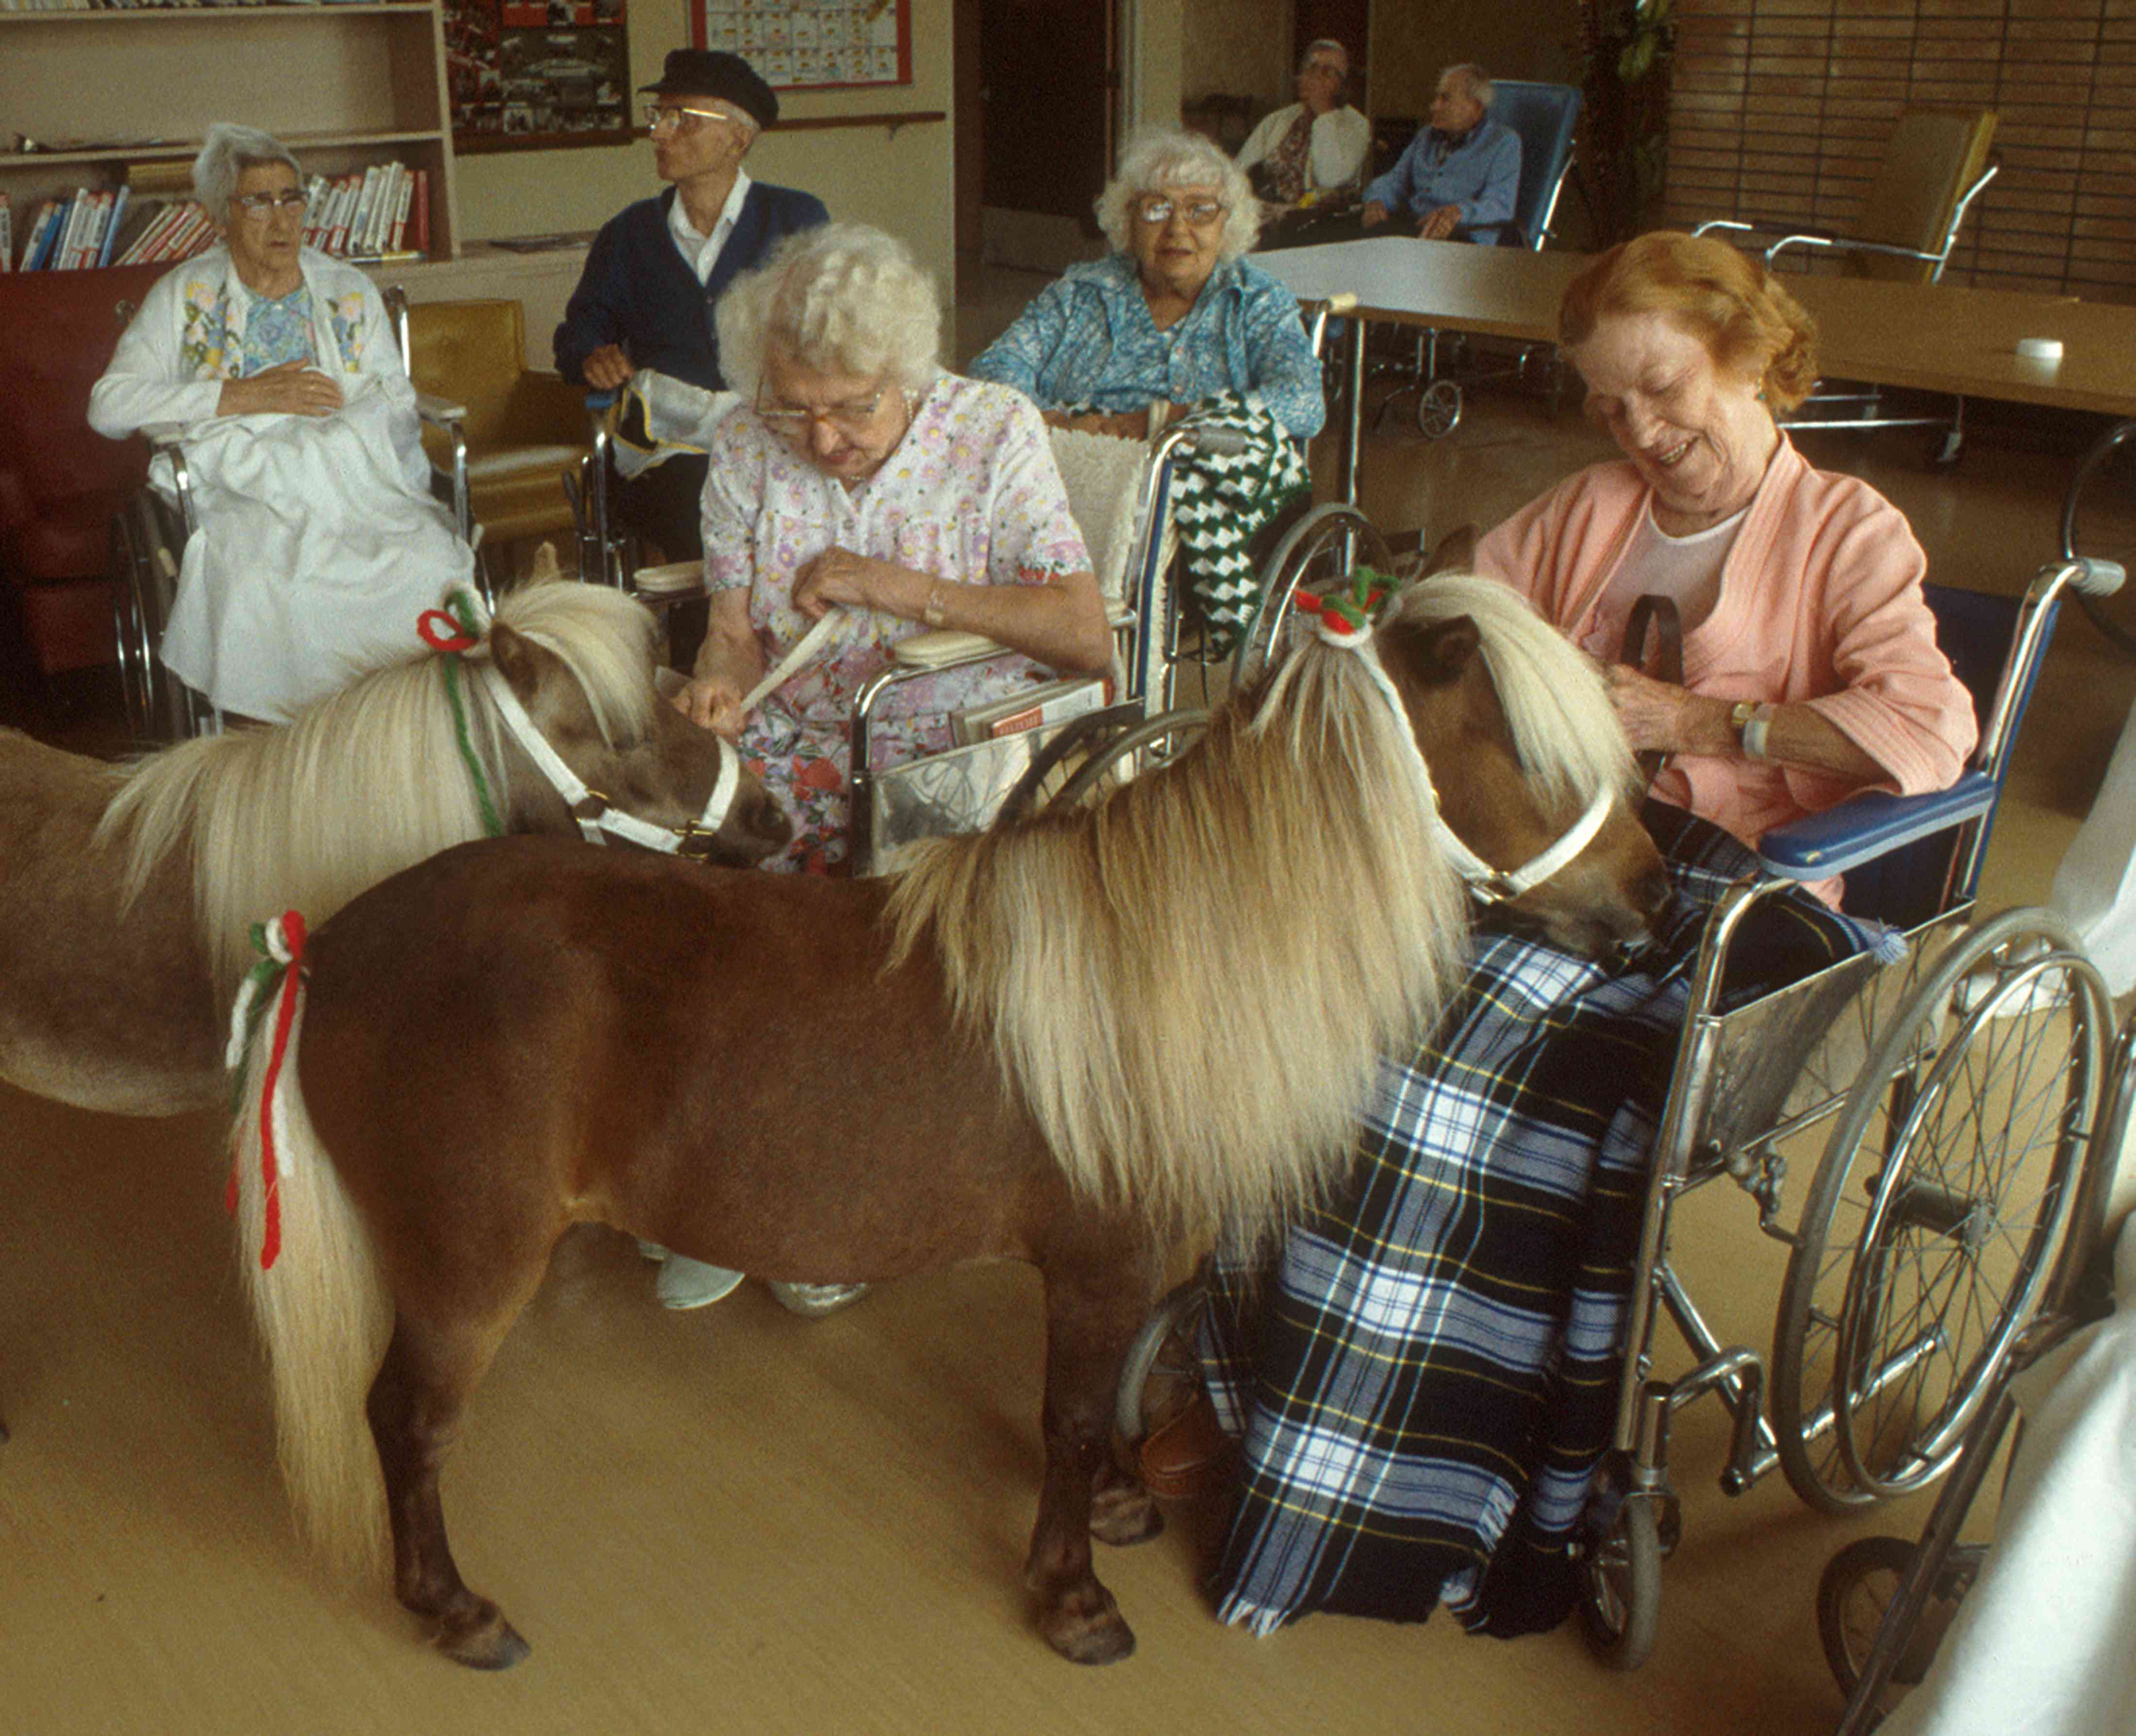 Miniature horses in a nursing home with senior citizens in wheelchairs